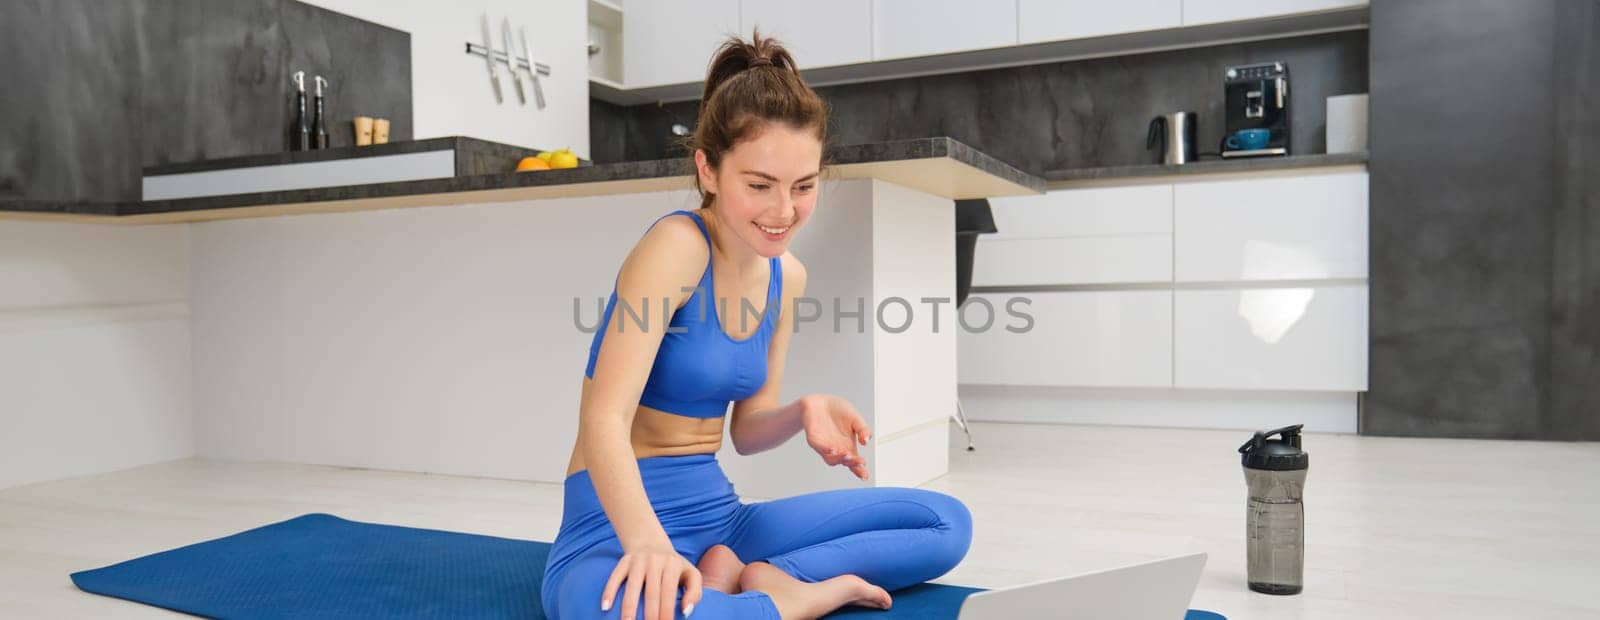 Portrait of fit, smiling fitness instructor, woman talking to laptop, discussing workout exercises with client, giving online yoga lesson via video chat.